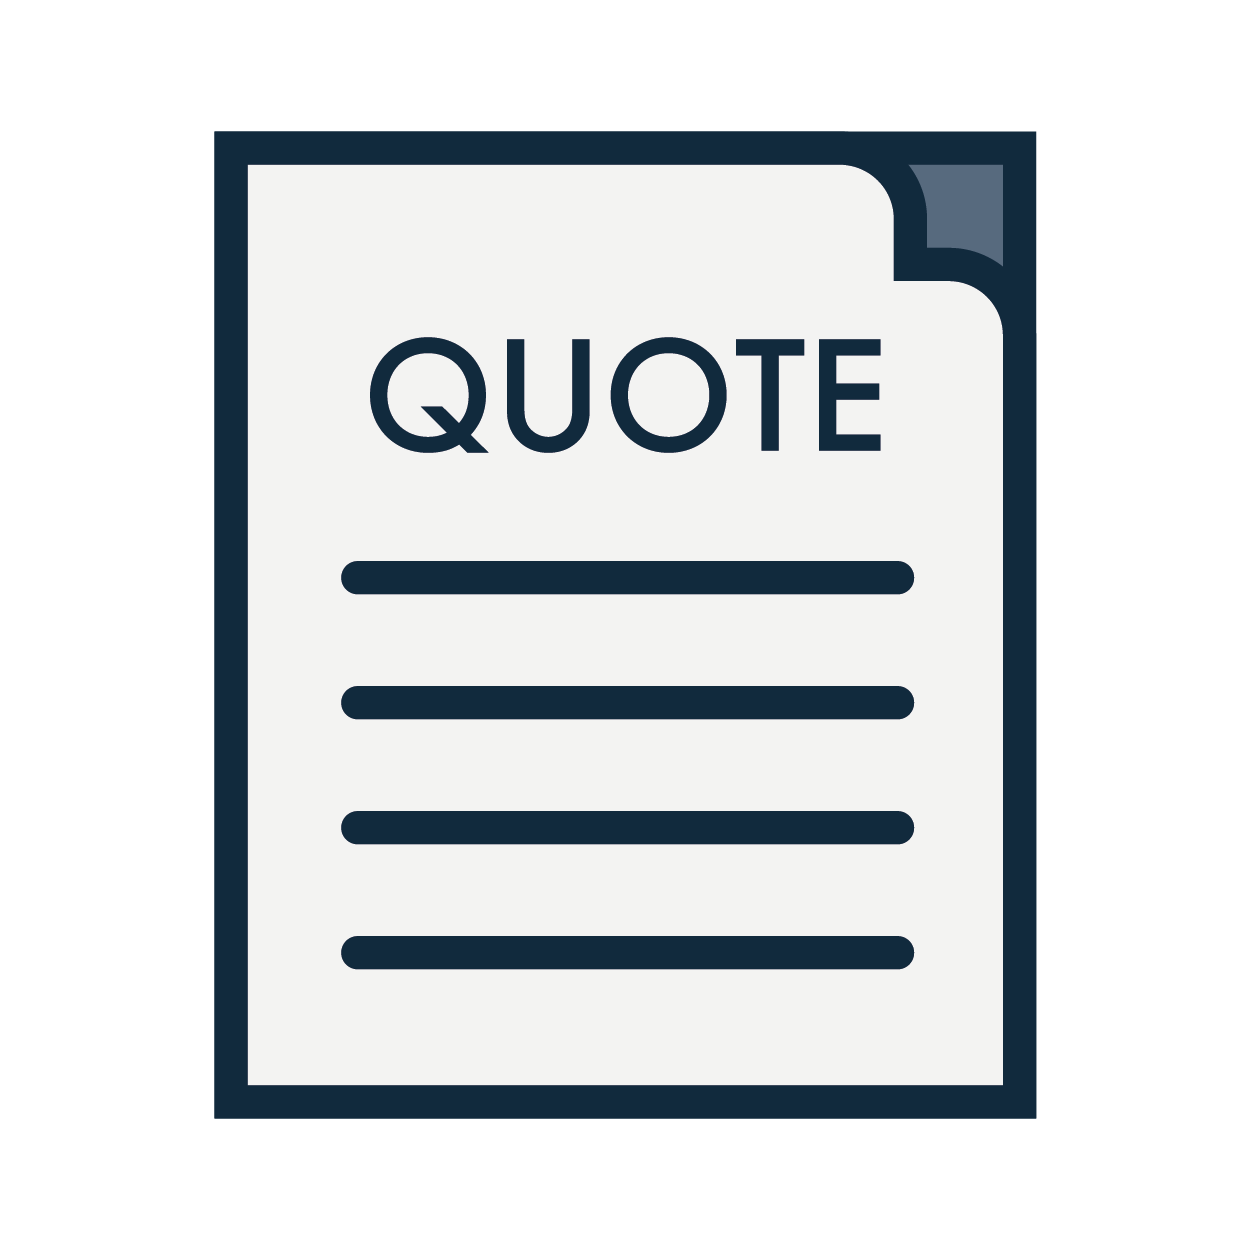 icon image of a piece of paper with quote written acrcoss top, folded corner and itemised lines written down